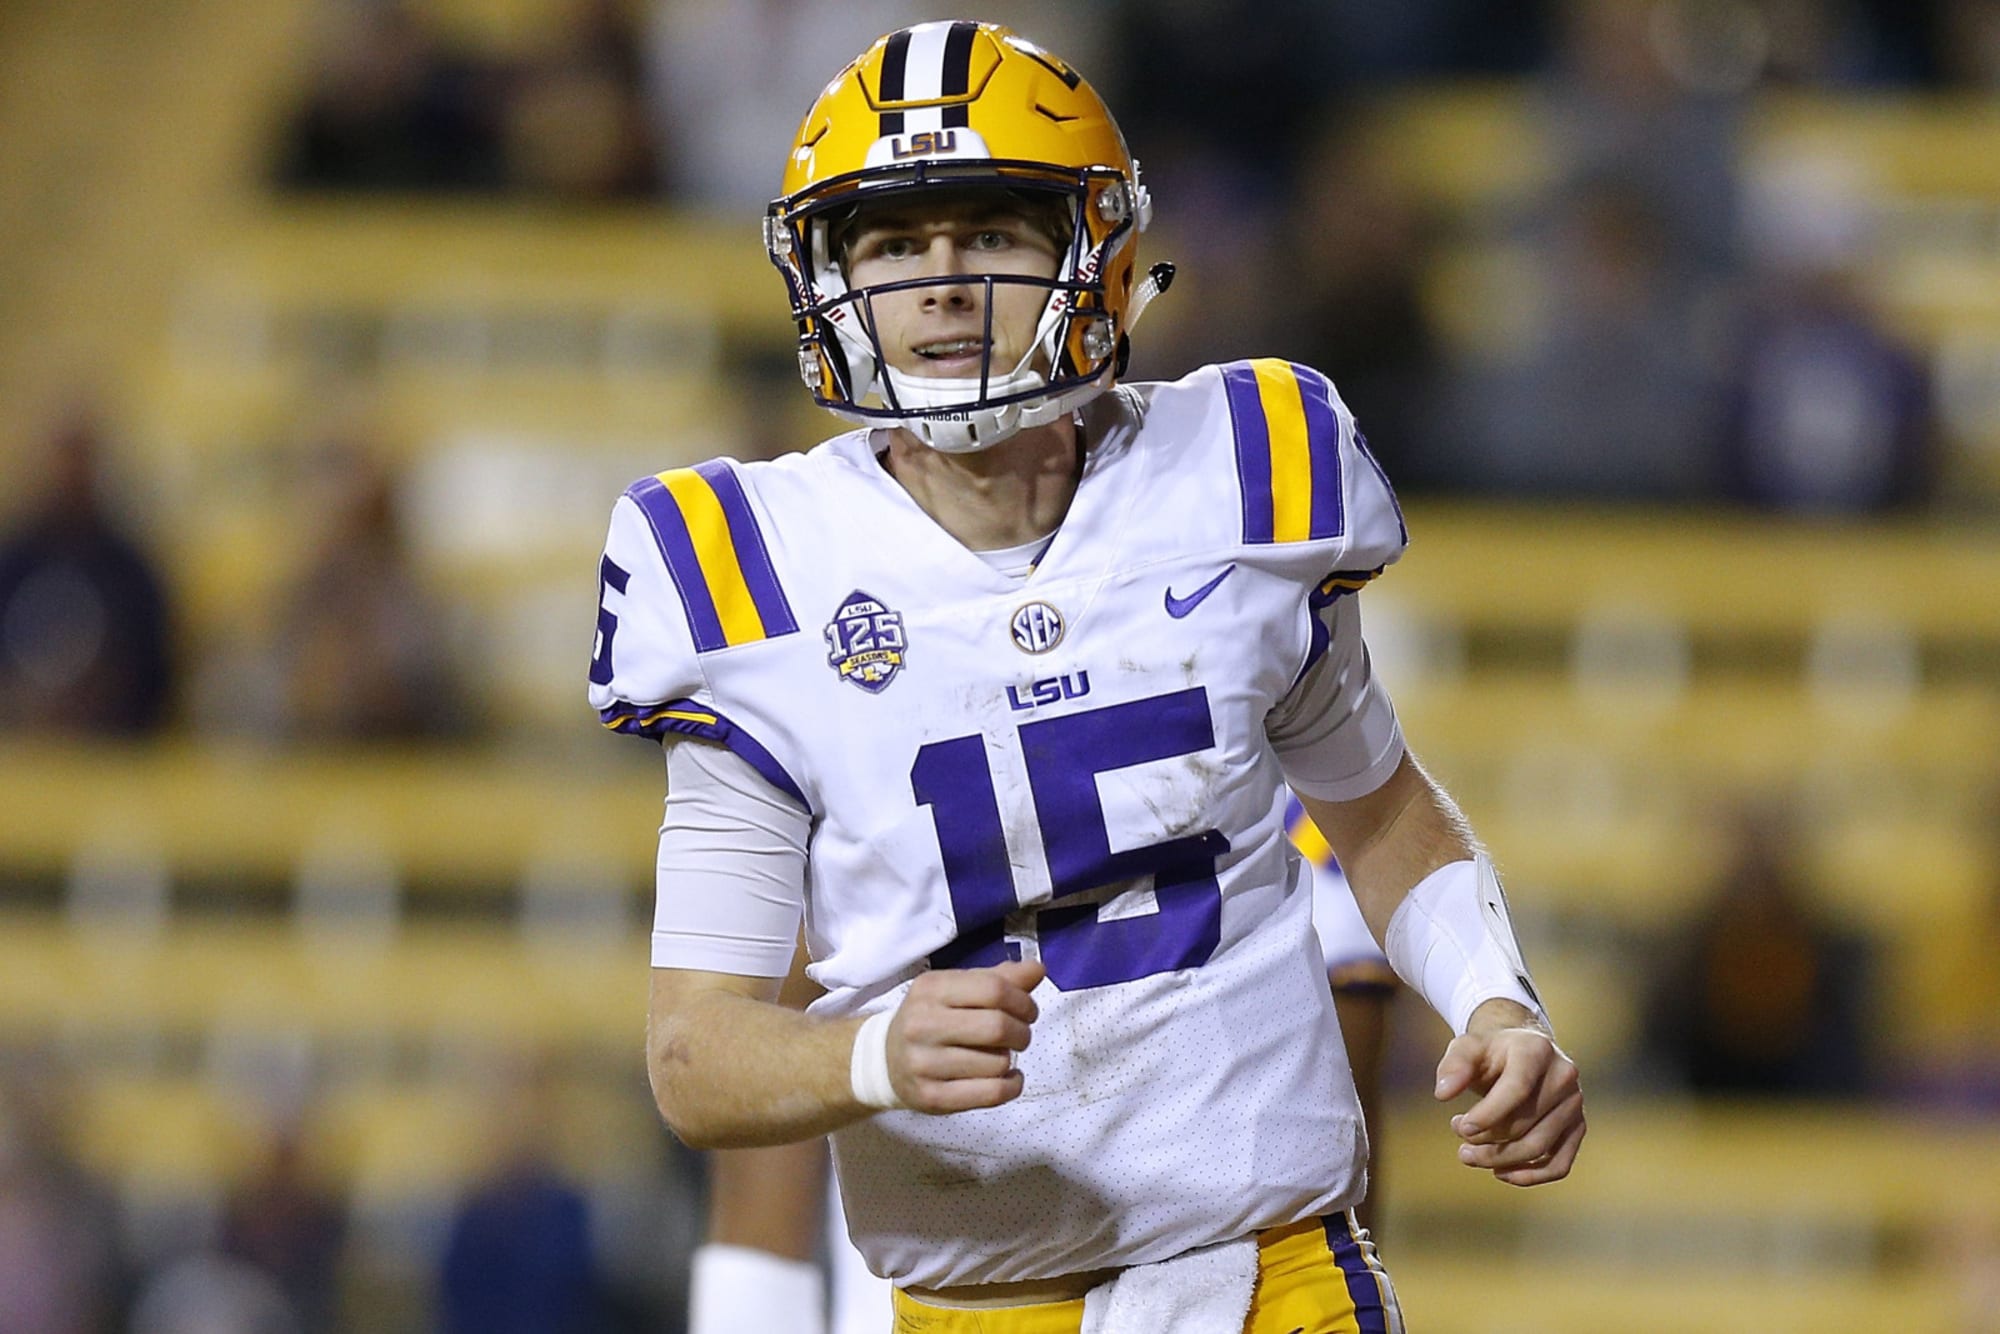 LSU Football Great sign that Myles Brennan will succeed as starting QB